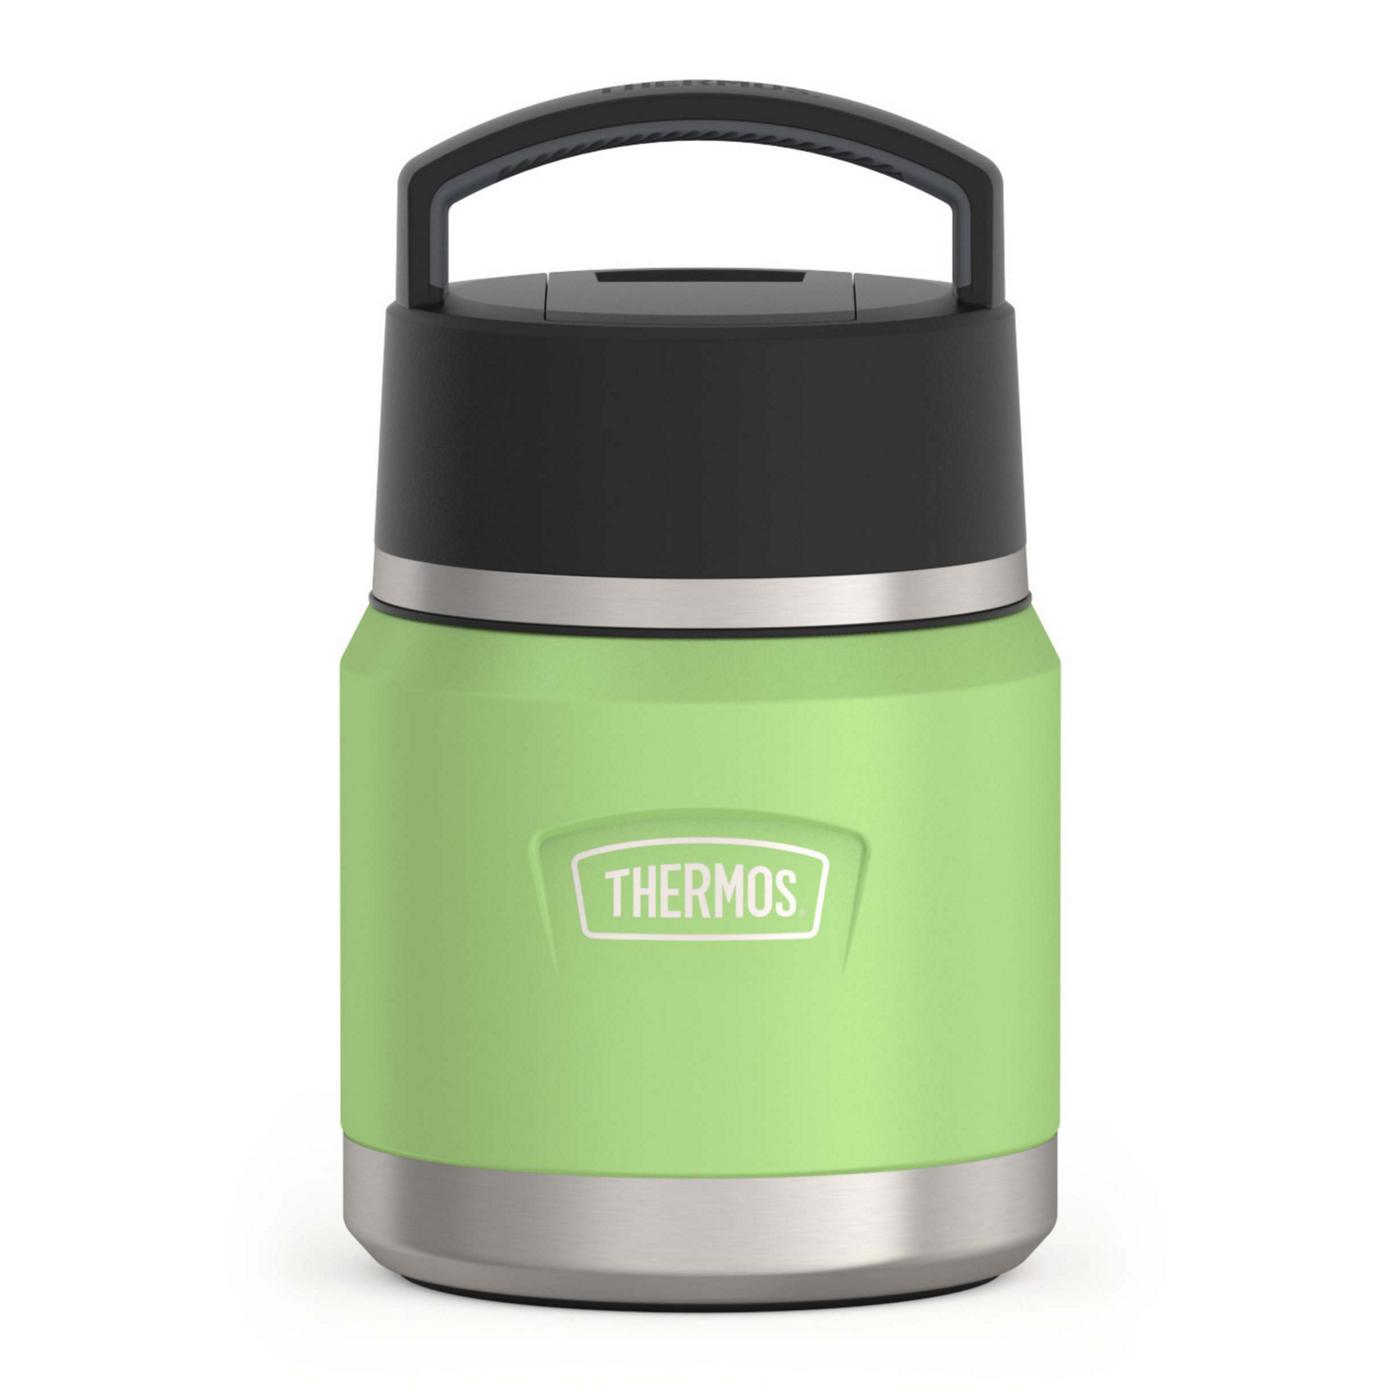 Thermos Icon Series Food Jar - Lime; image 1 of 4